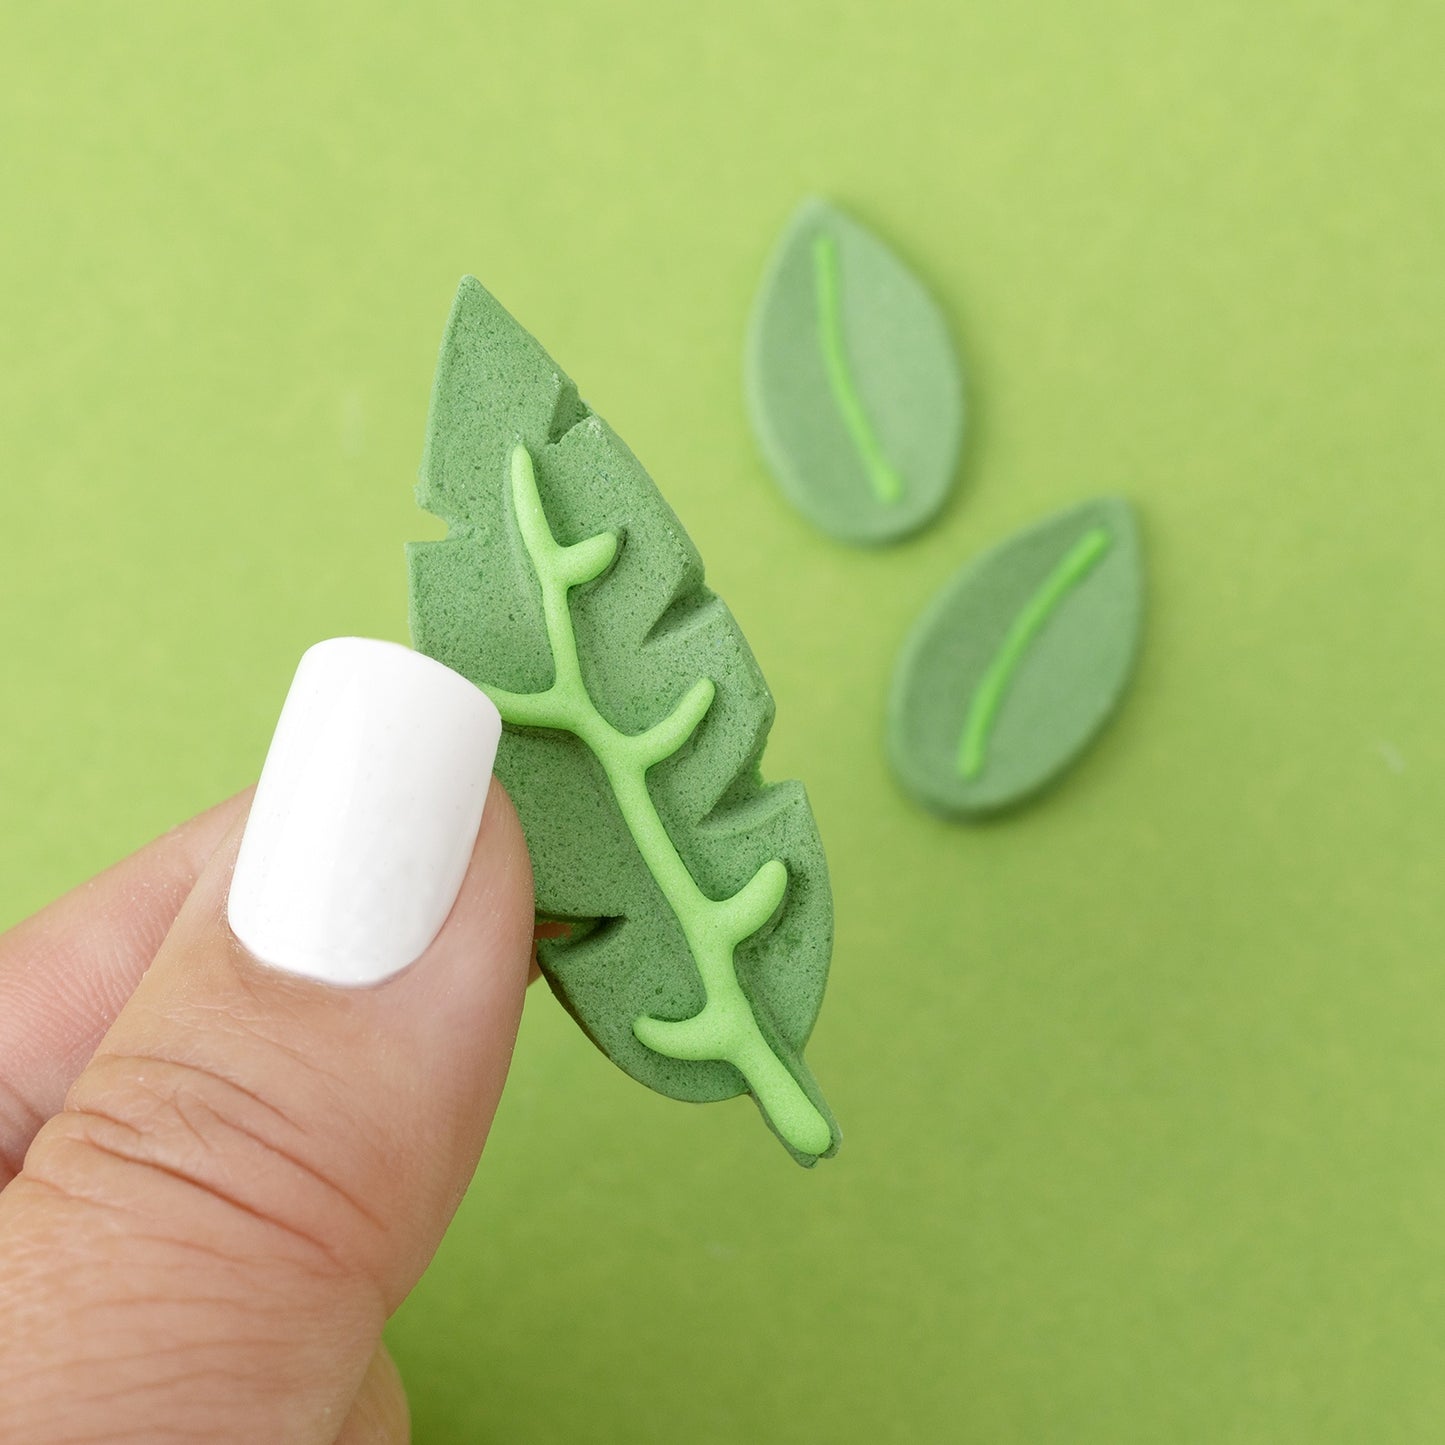 Sweetshop Icing Decoration-Leaves, 9 Pieces